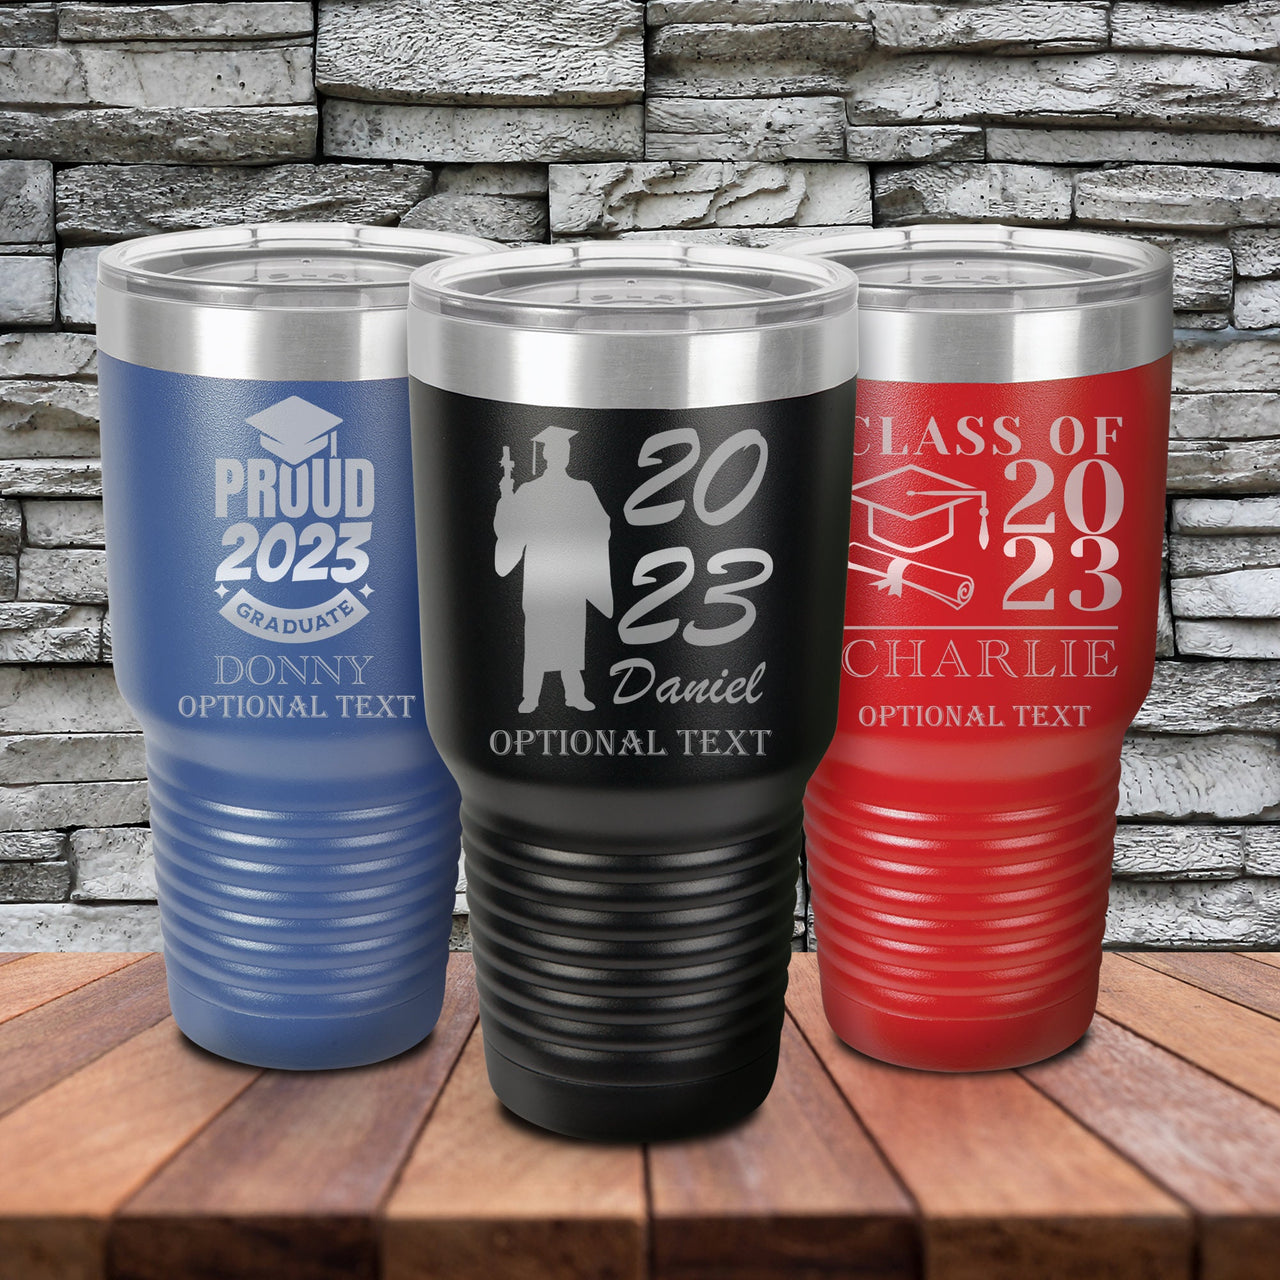 Personalized Tumbler 30 oz Graduation Gift Class 2023, College Graduate Gifts for Her, Graduation Tumbler, Personalized Grad Gift for Friend